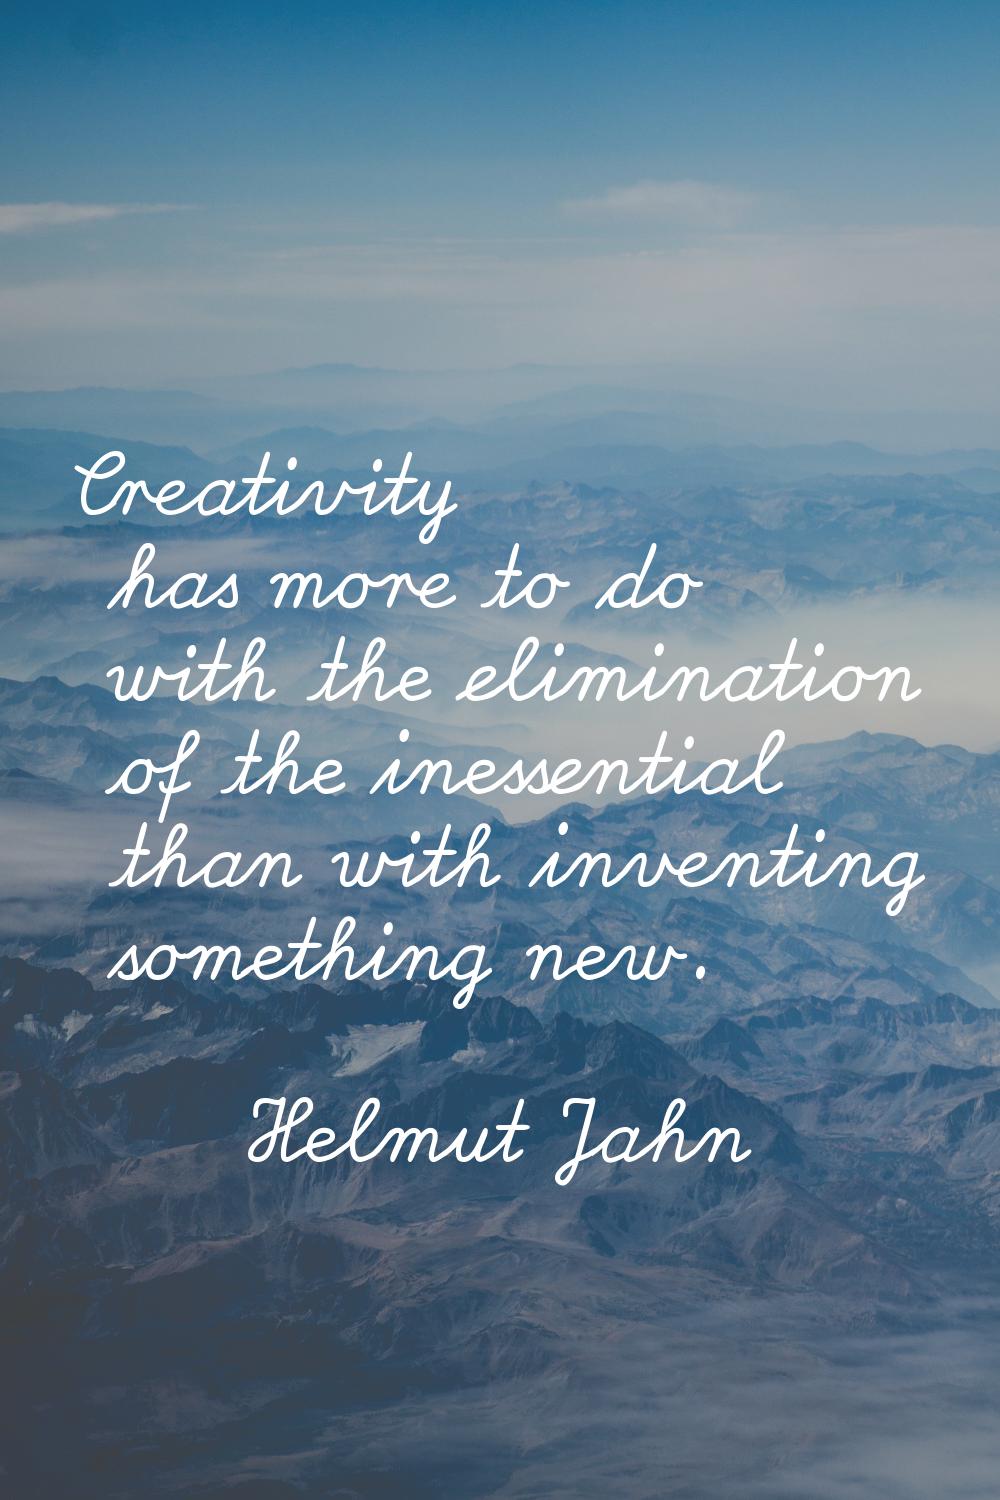 Creativity has more to do with the elimination of the inessential than with inventing something new